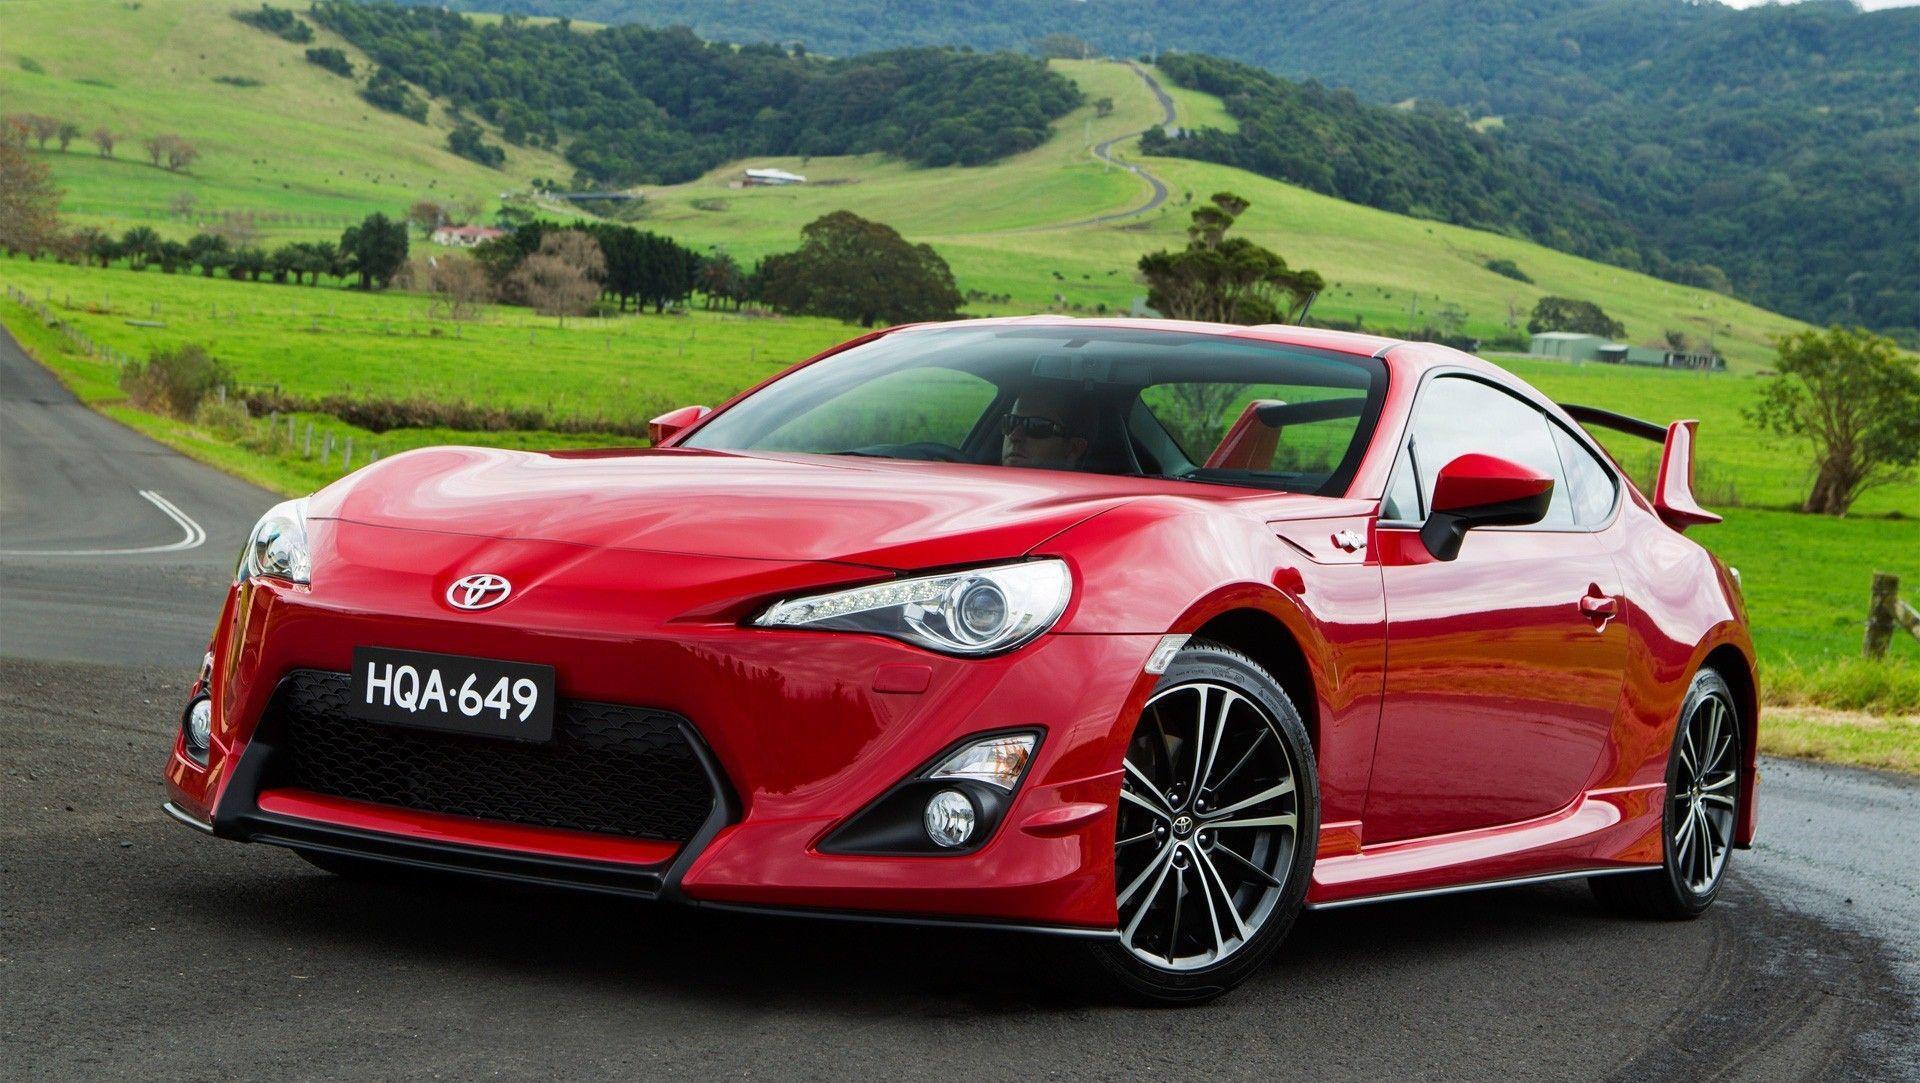 Toyota GT 86 Wallpaper Image Photo Picture Background